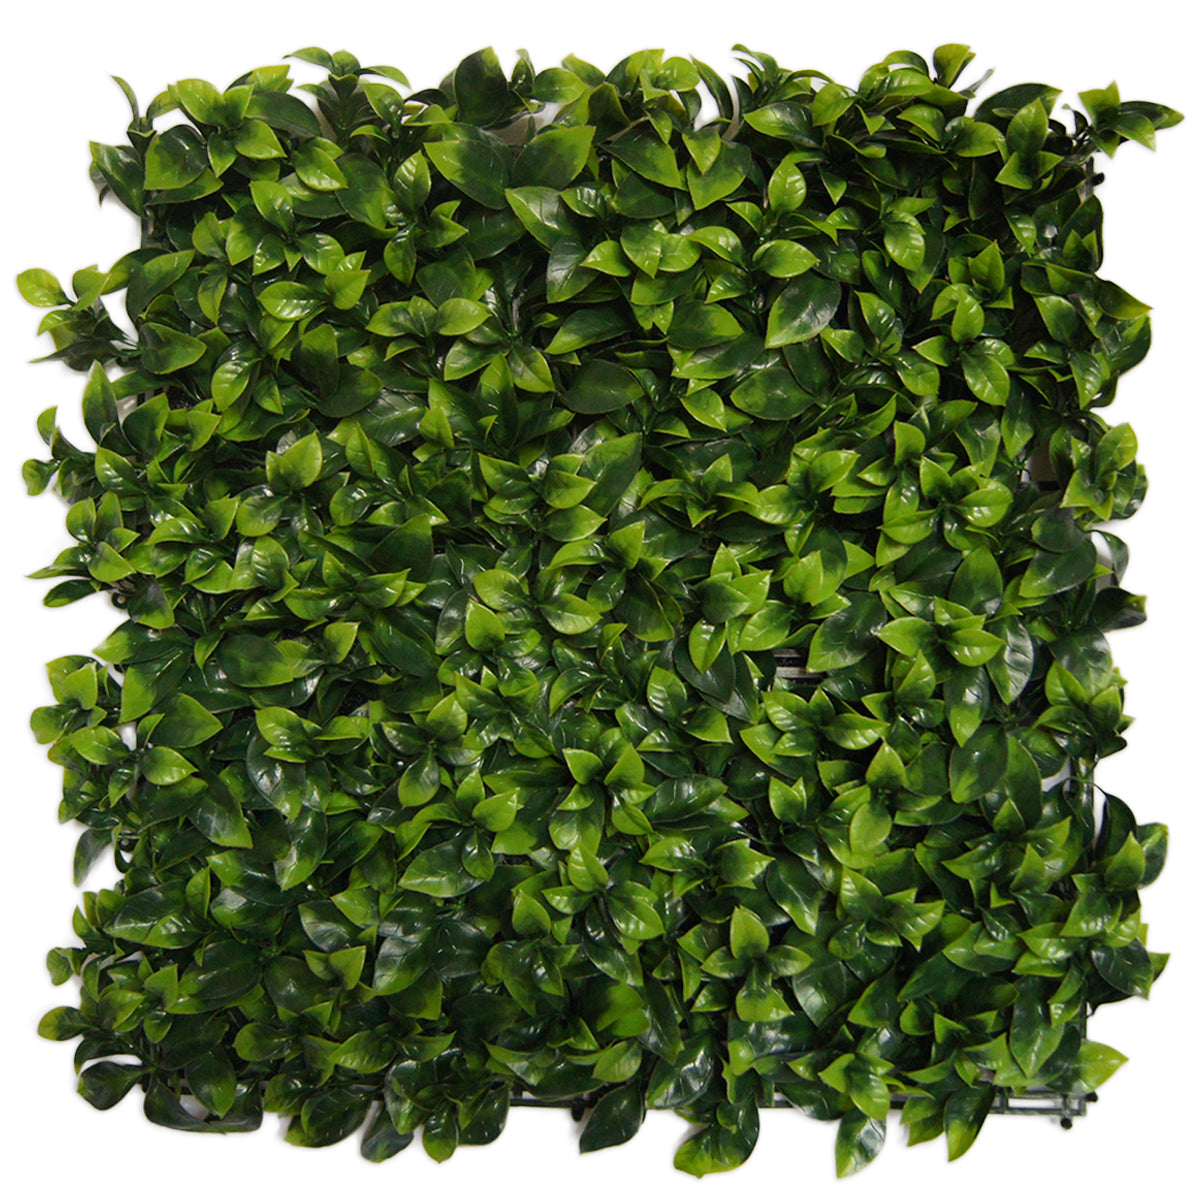 Artificial Plant Living Wall Panels for Indoor/Outdoor Use (4 pack - Cancun Style)